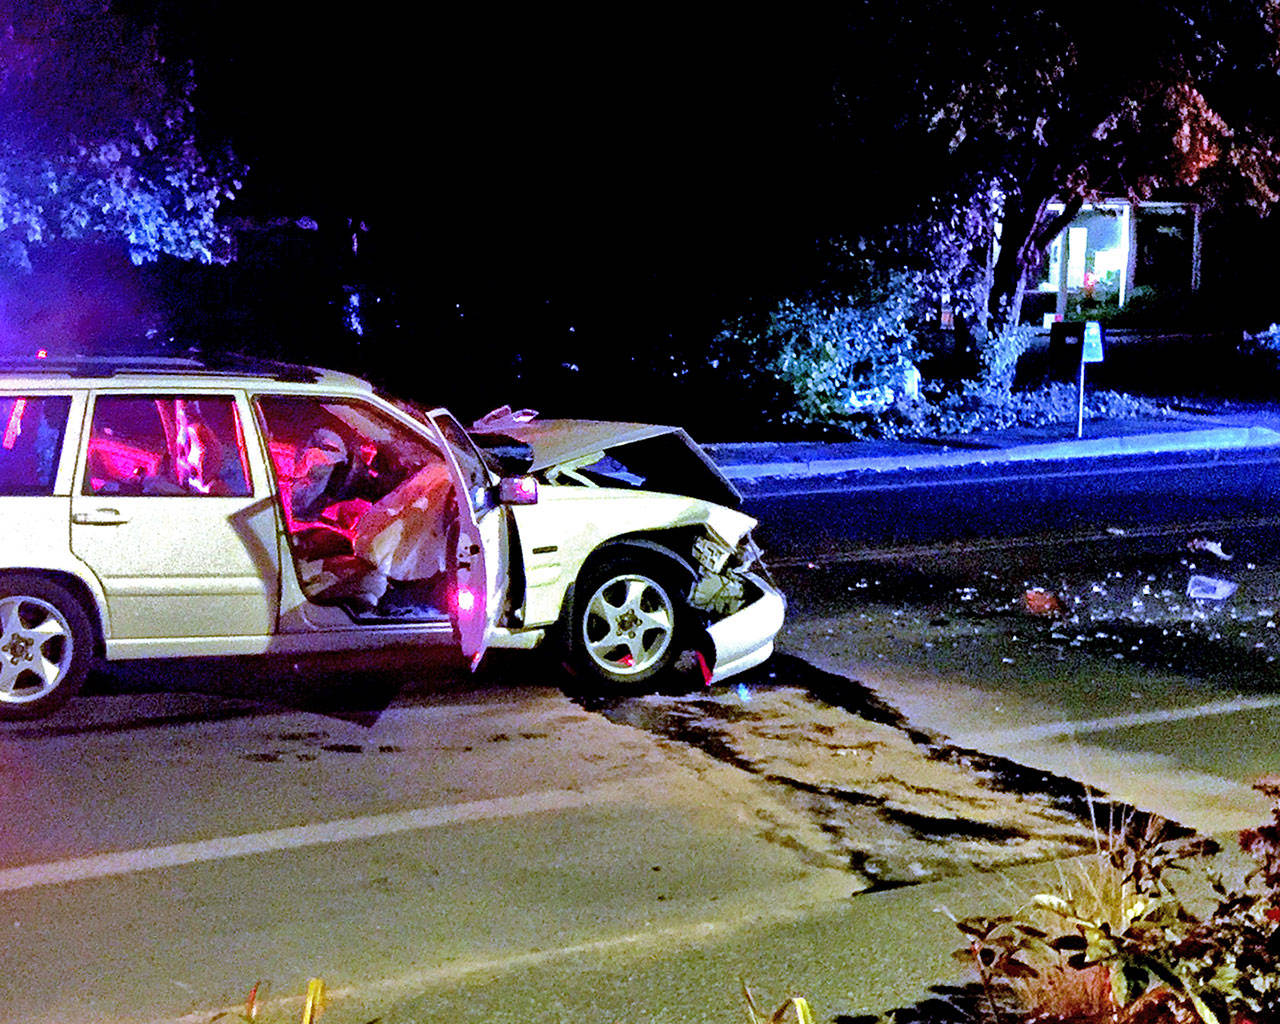 A 44-year-old Bainbridge Island man was arrested Monday, Sept. 24 for driving under the influence and allegedly committing vehicular assault after he struck another vehicle which then hit a pedestrian walking near Bainbridge Public Library. (Robert Dashiell photo)